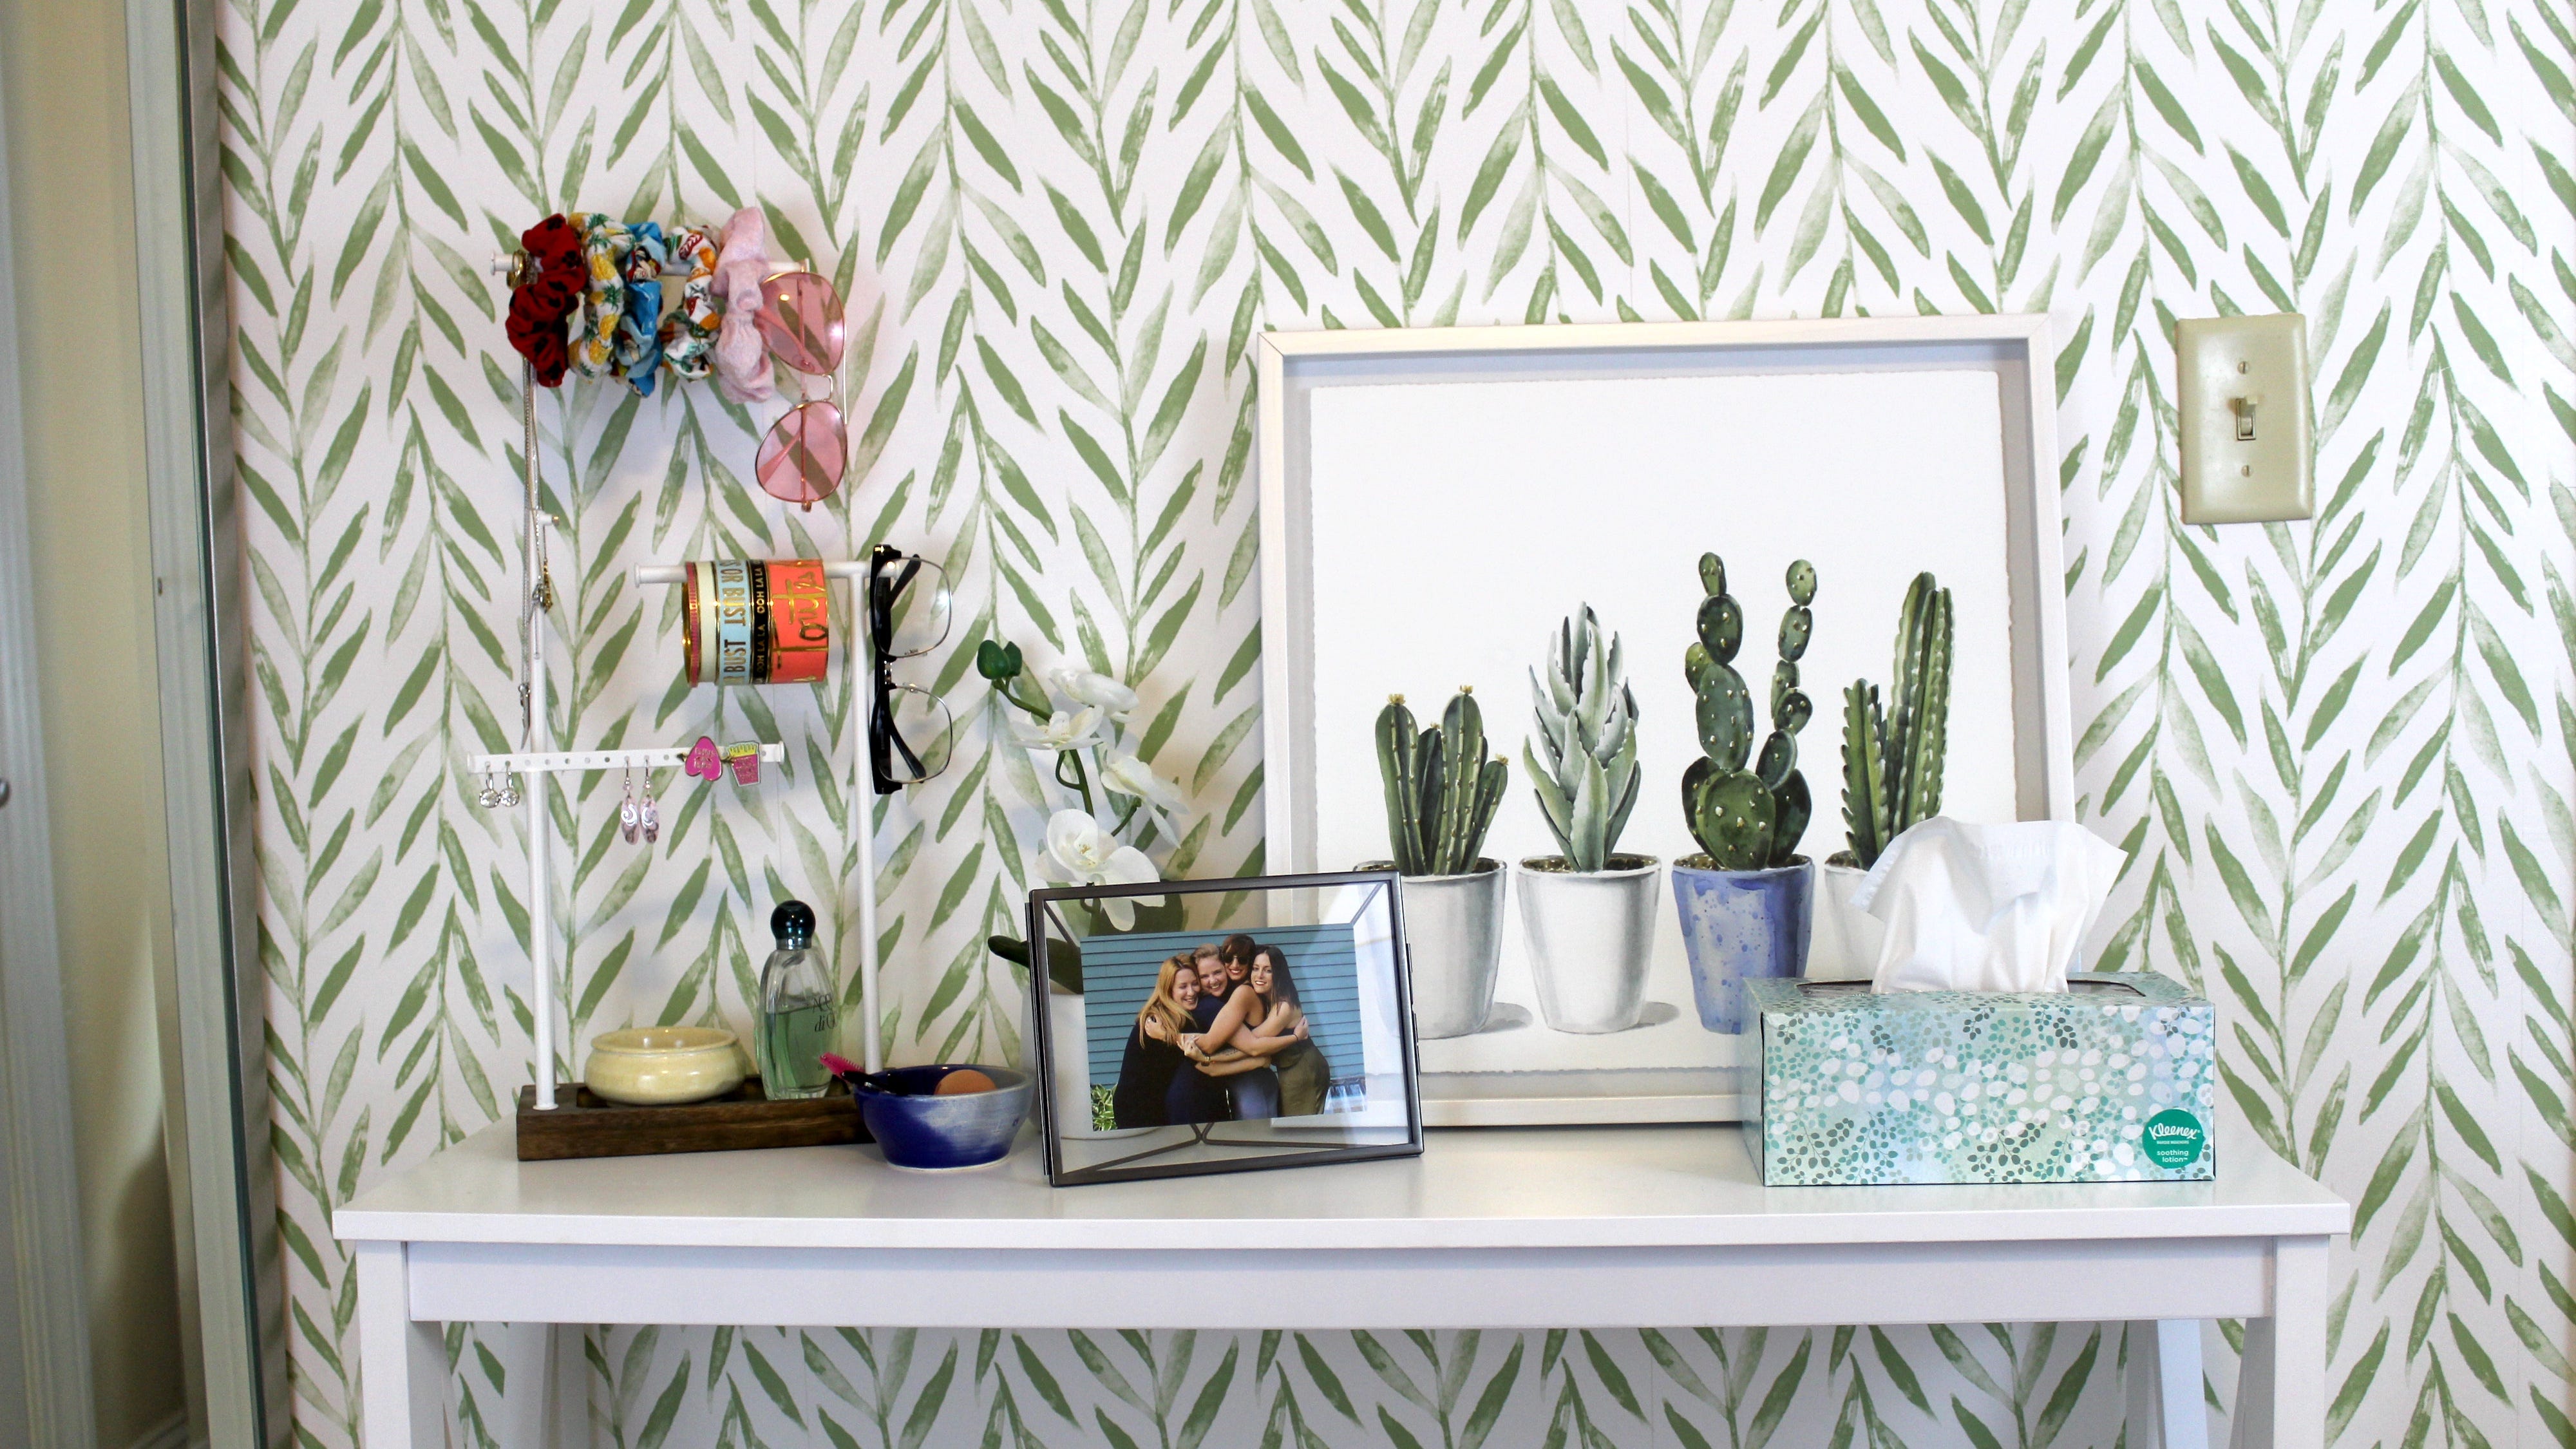 Removable wallpaper review: It's a decor game-changer - Reviewed